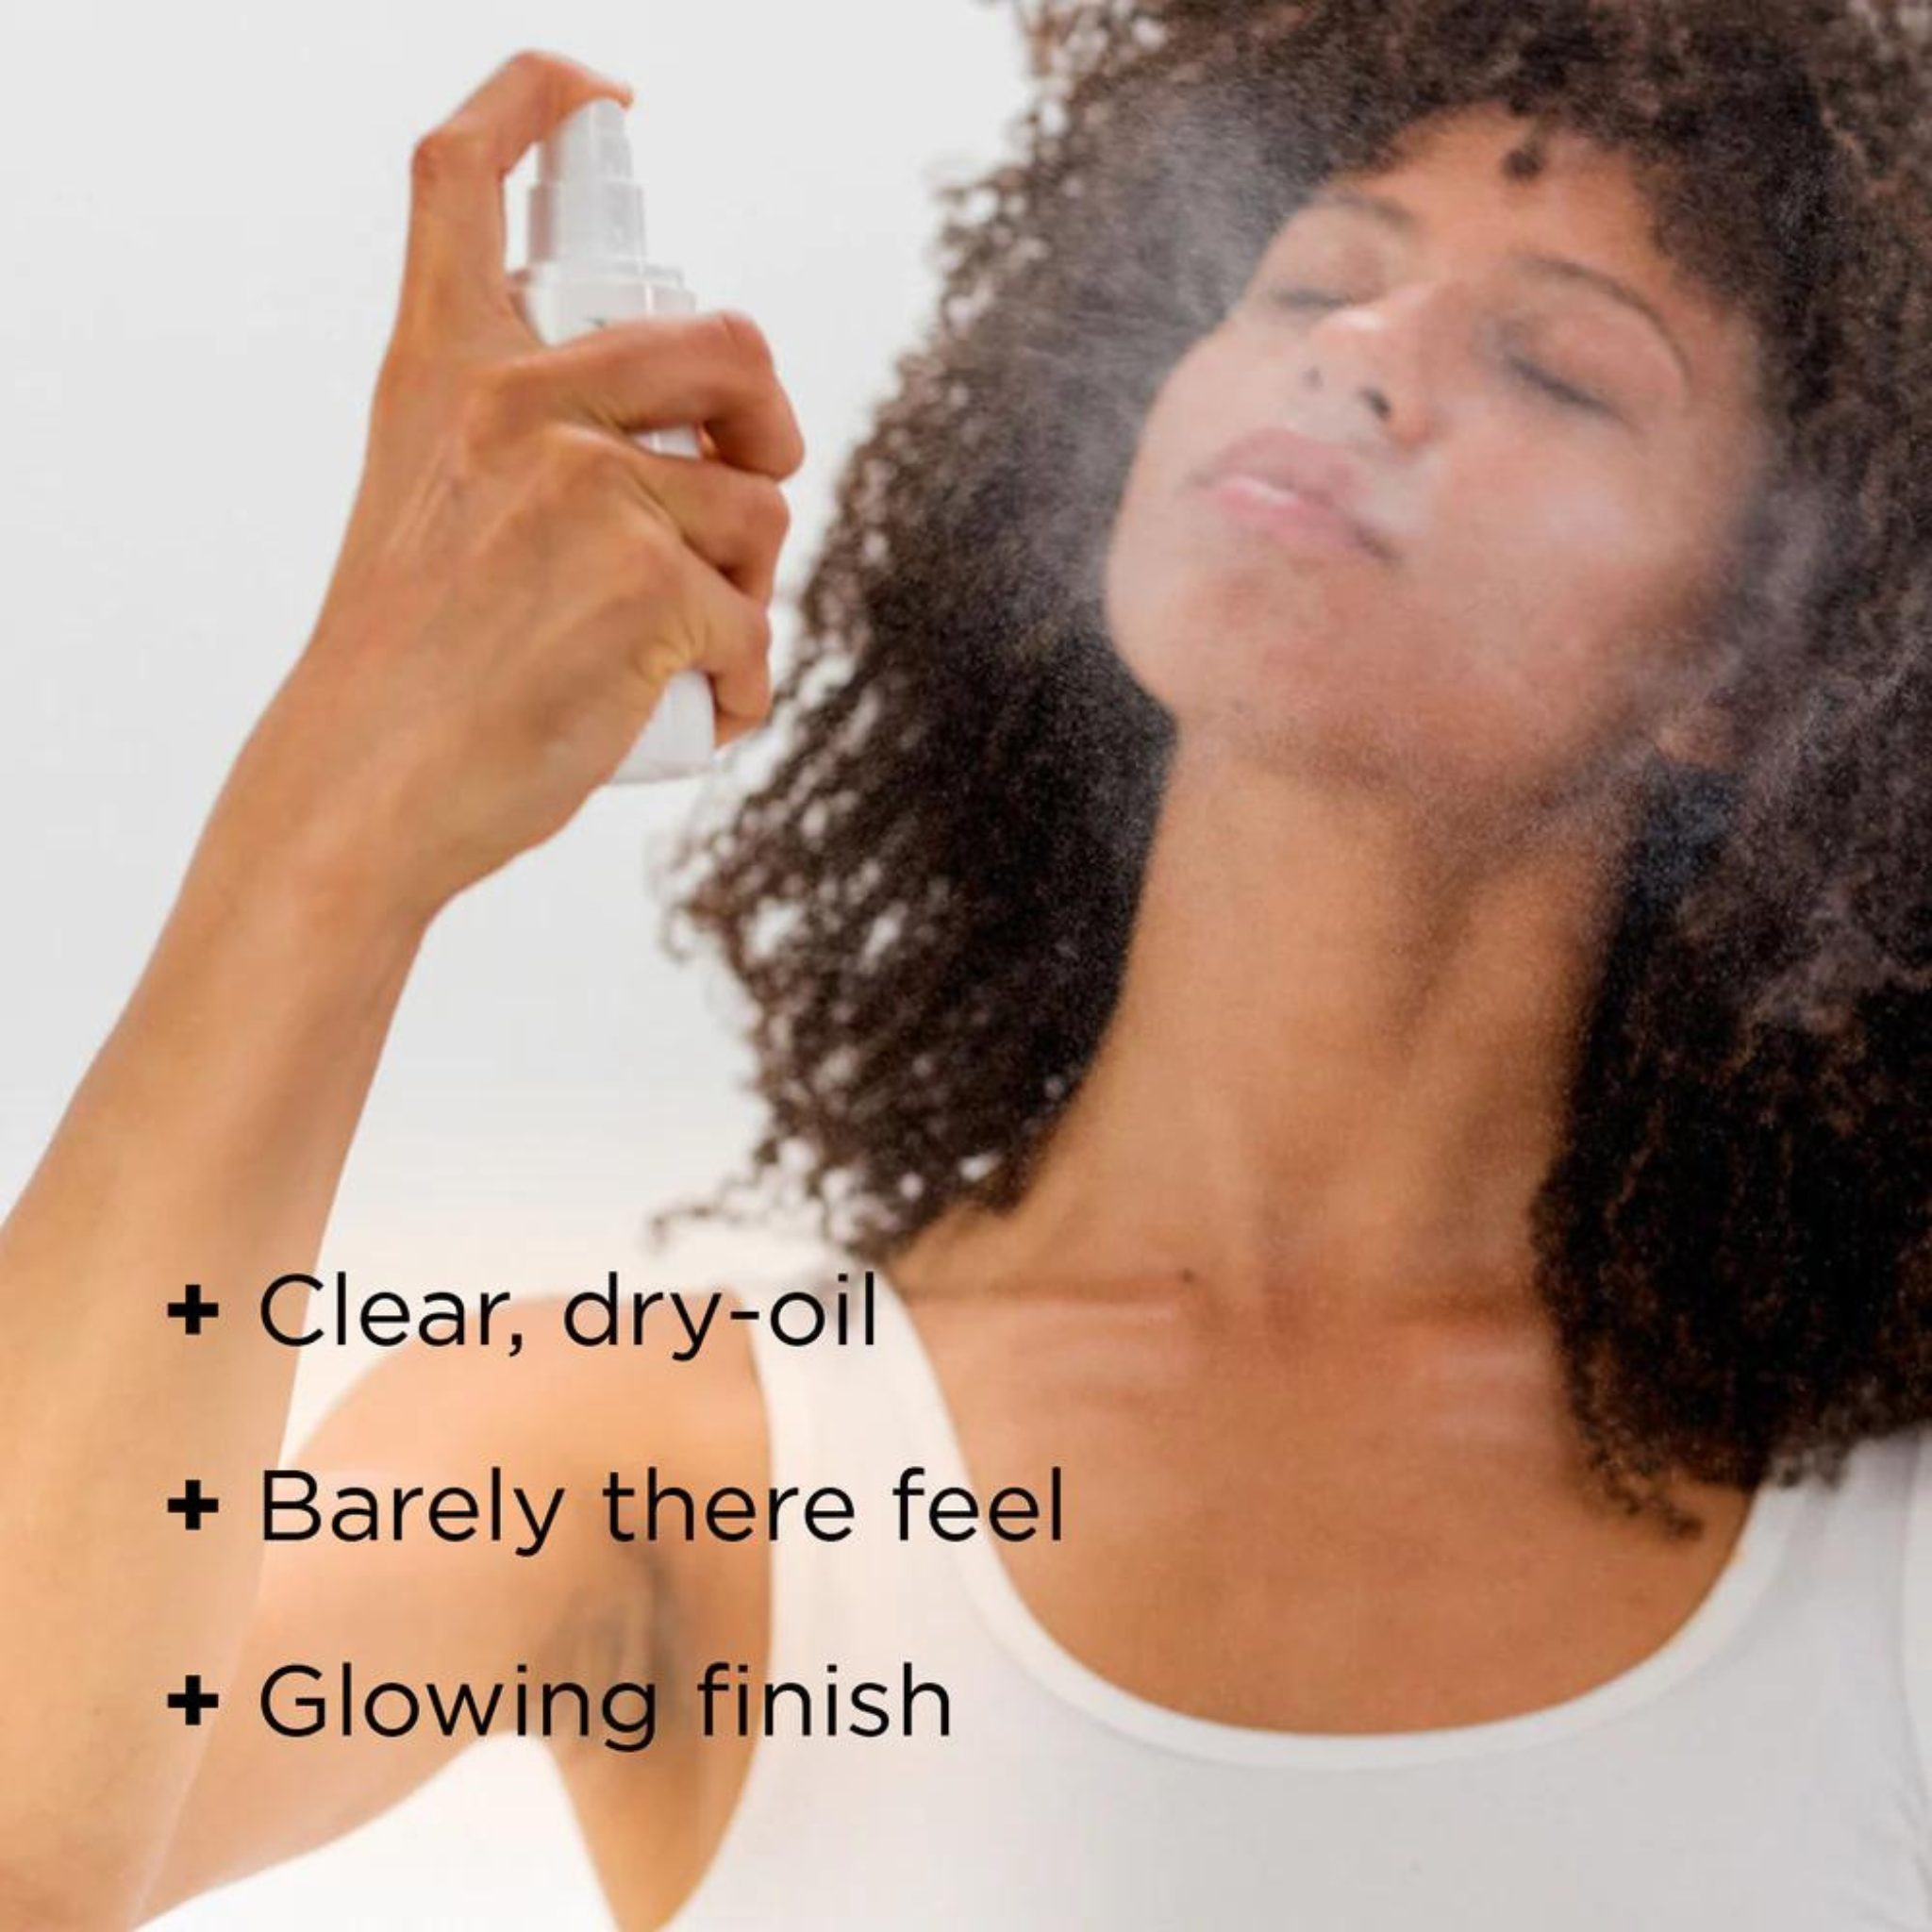 description of the application of the Saily Prevention SPF30 Mist